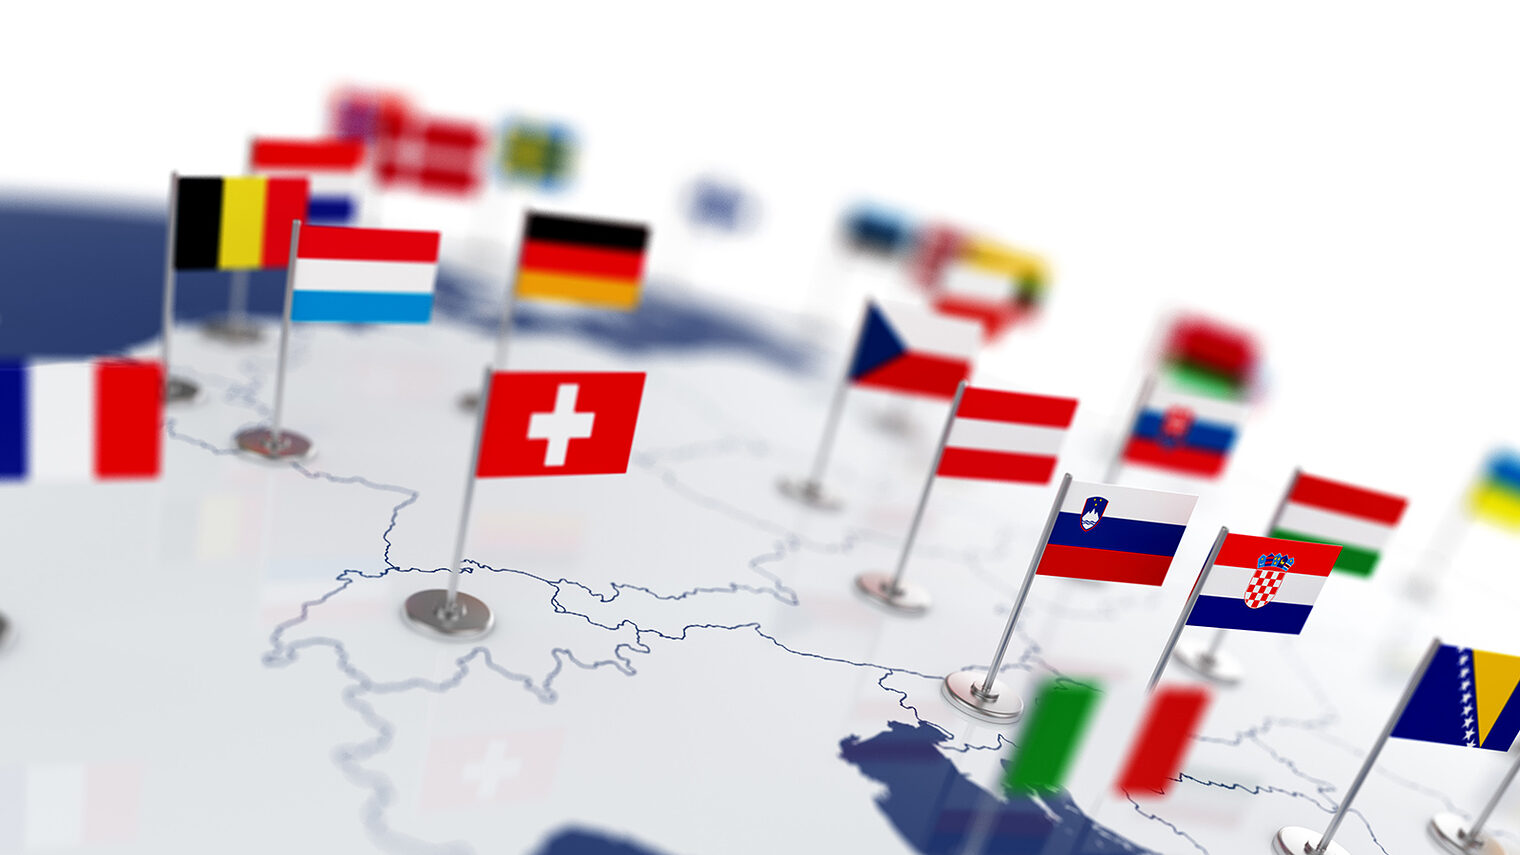 Europe map with countries flags. Shalow focus 3d illustration isolated on white background Schlagwort(e): 3d, atlas, austria, blue, border, business, cartography, concept, continent, country, design, earth, economy, england, eu, europe, european, finland, flag, france, geography, germany, global, globe, greece, illustration, international, ireland, isolated, italy, kingdom, land, location, map, nation, national, politics, rendering, romania, spain, sweden, symbol, travel, uk, union, united, white, world, 3d, atlas, austria, blue, border, business, cartography, concept, continent, country, design, earth, economy, england, eu, europe, european, finland, flag, france, geography, germany, global, globe, greece, illustration, international, ireland, isolated, italy, kingdom, land, location, map, nation, national, politics, rendering, romania, spain, sweden, symbol, travel, uk, union, united, white, world